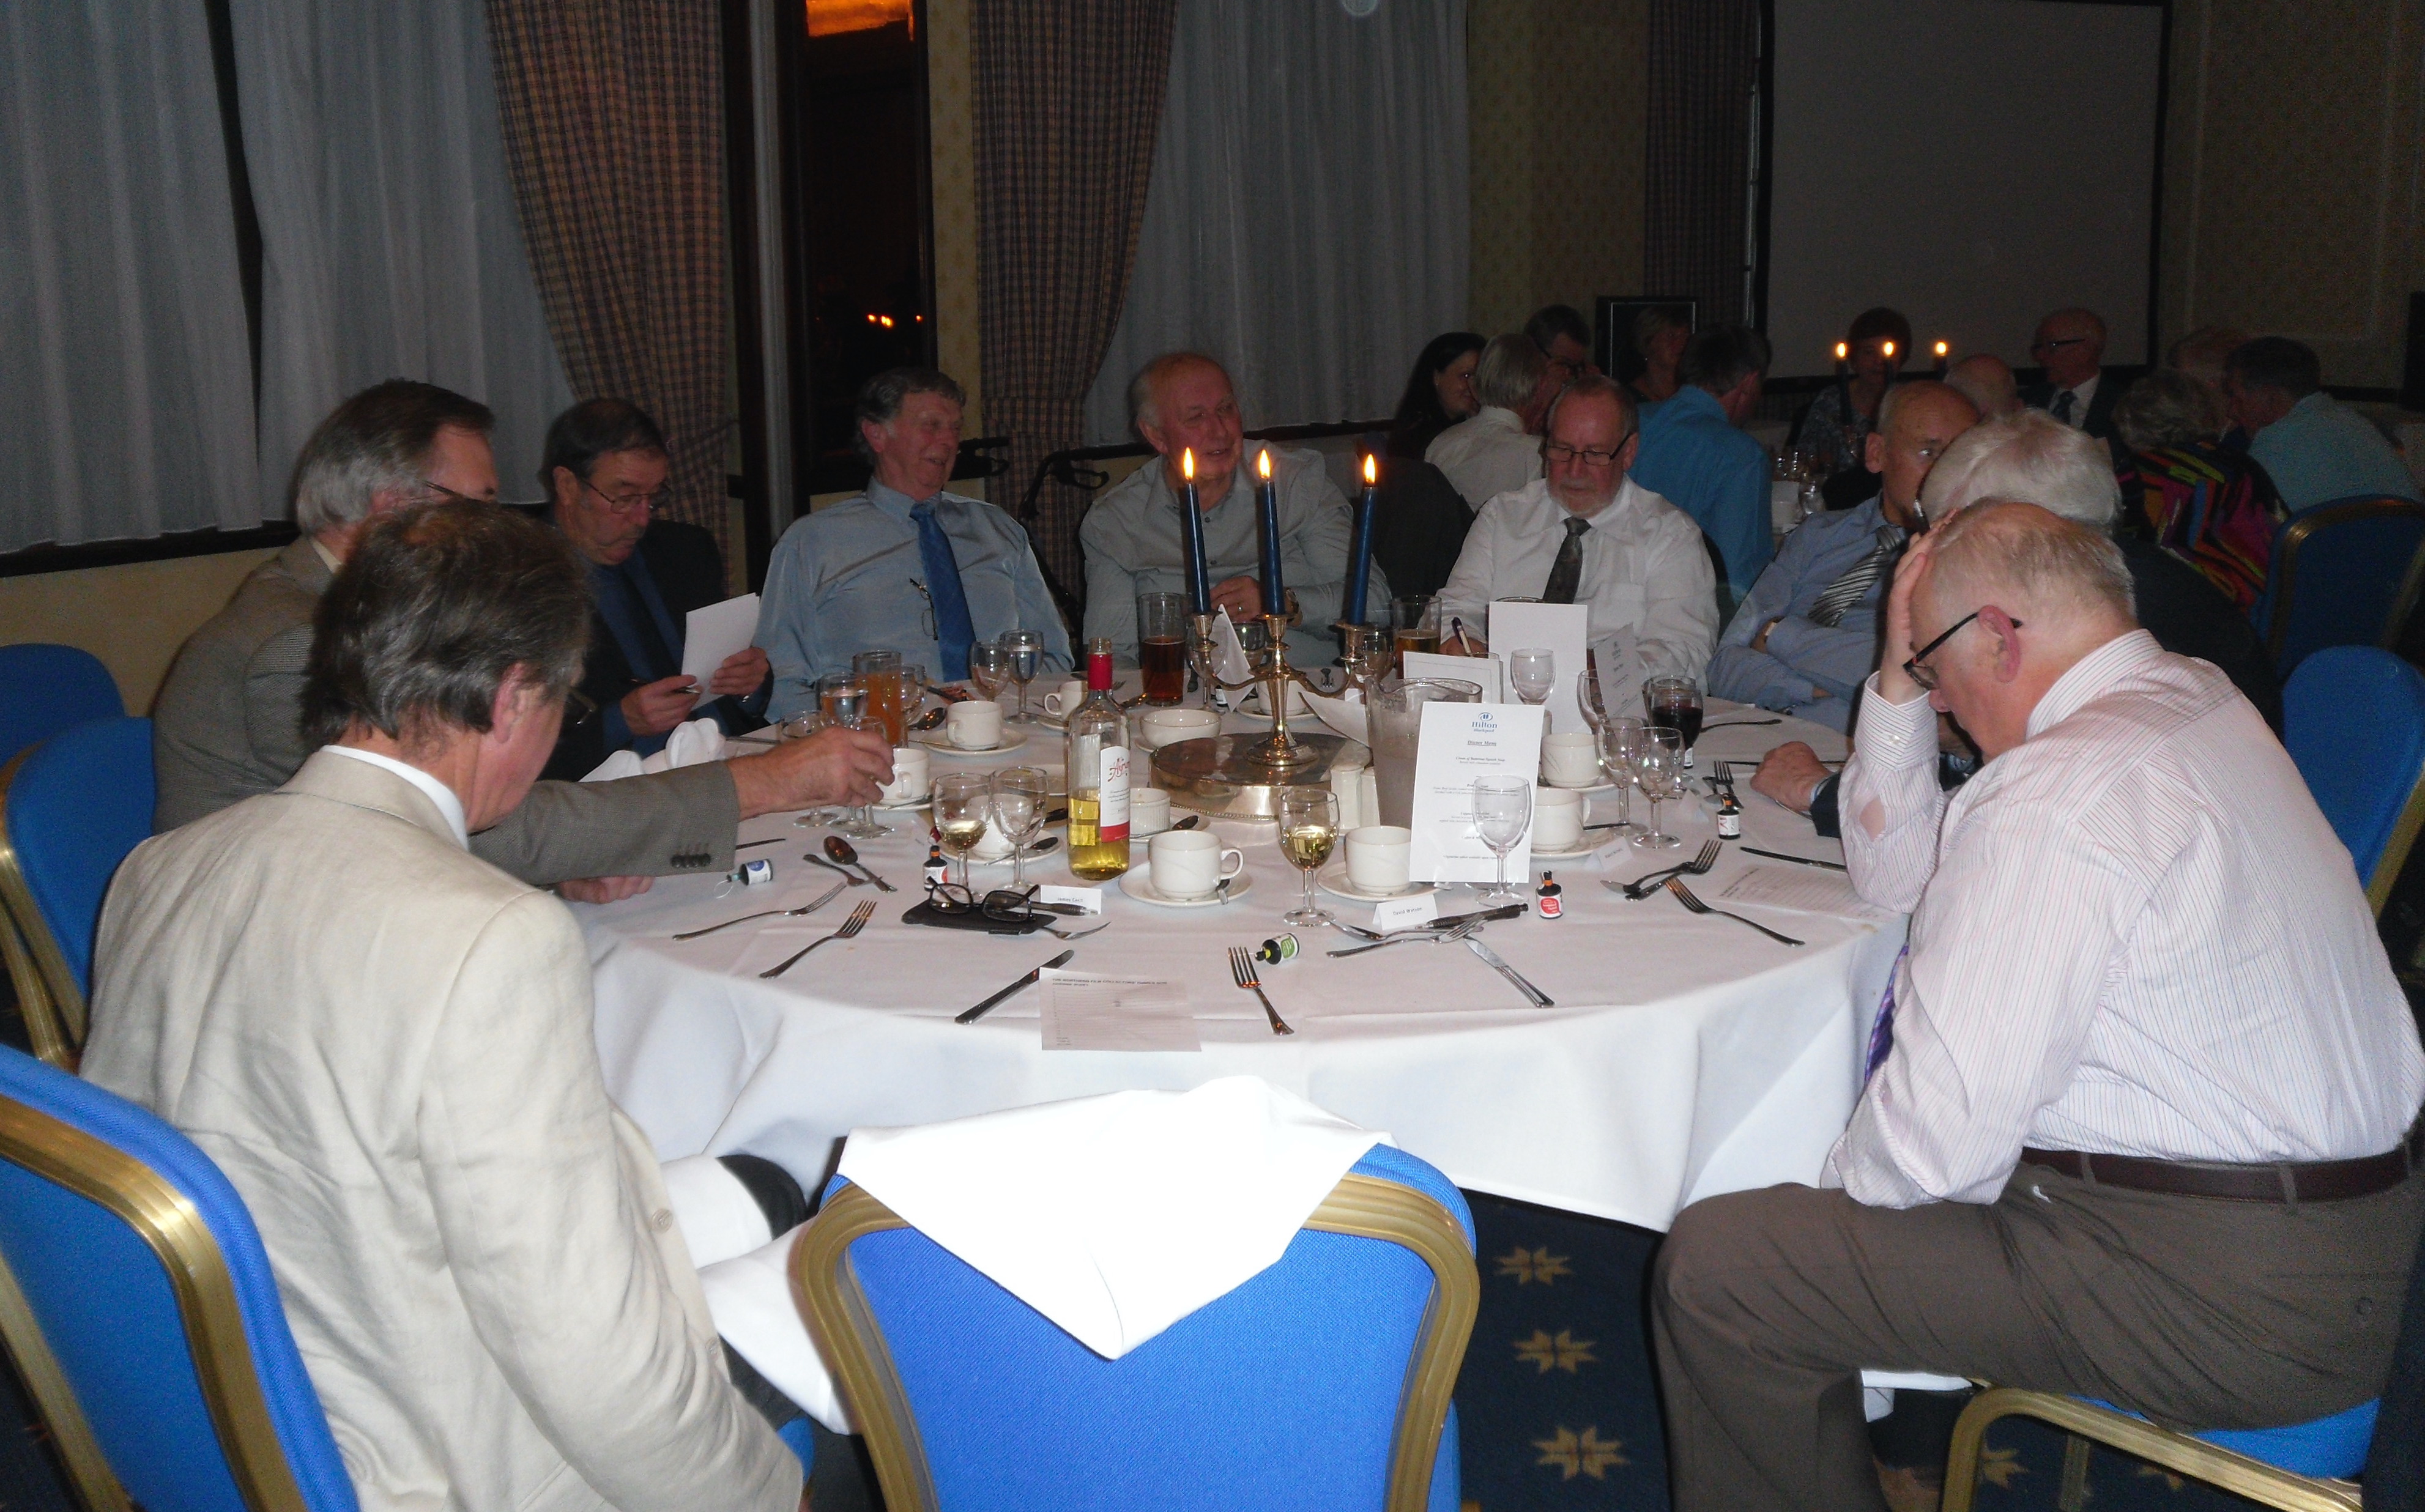 Taking part in the quiz at the 2014 Dinner